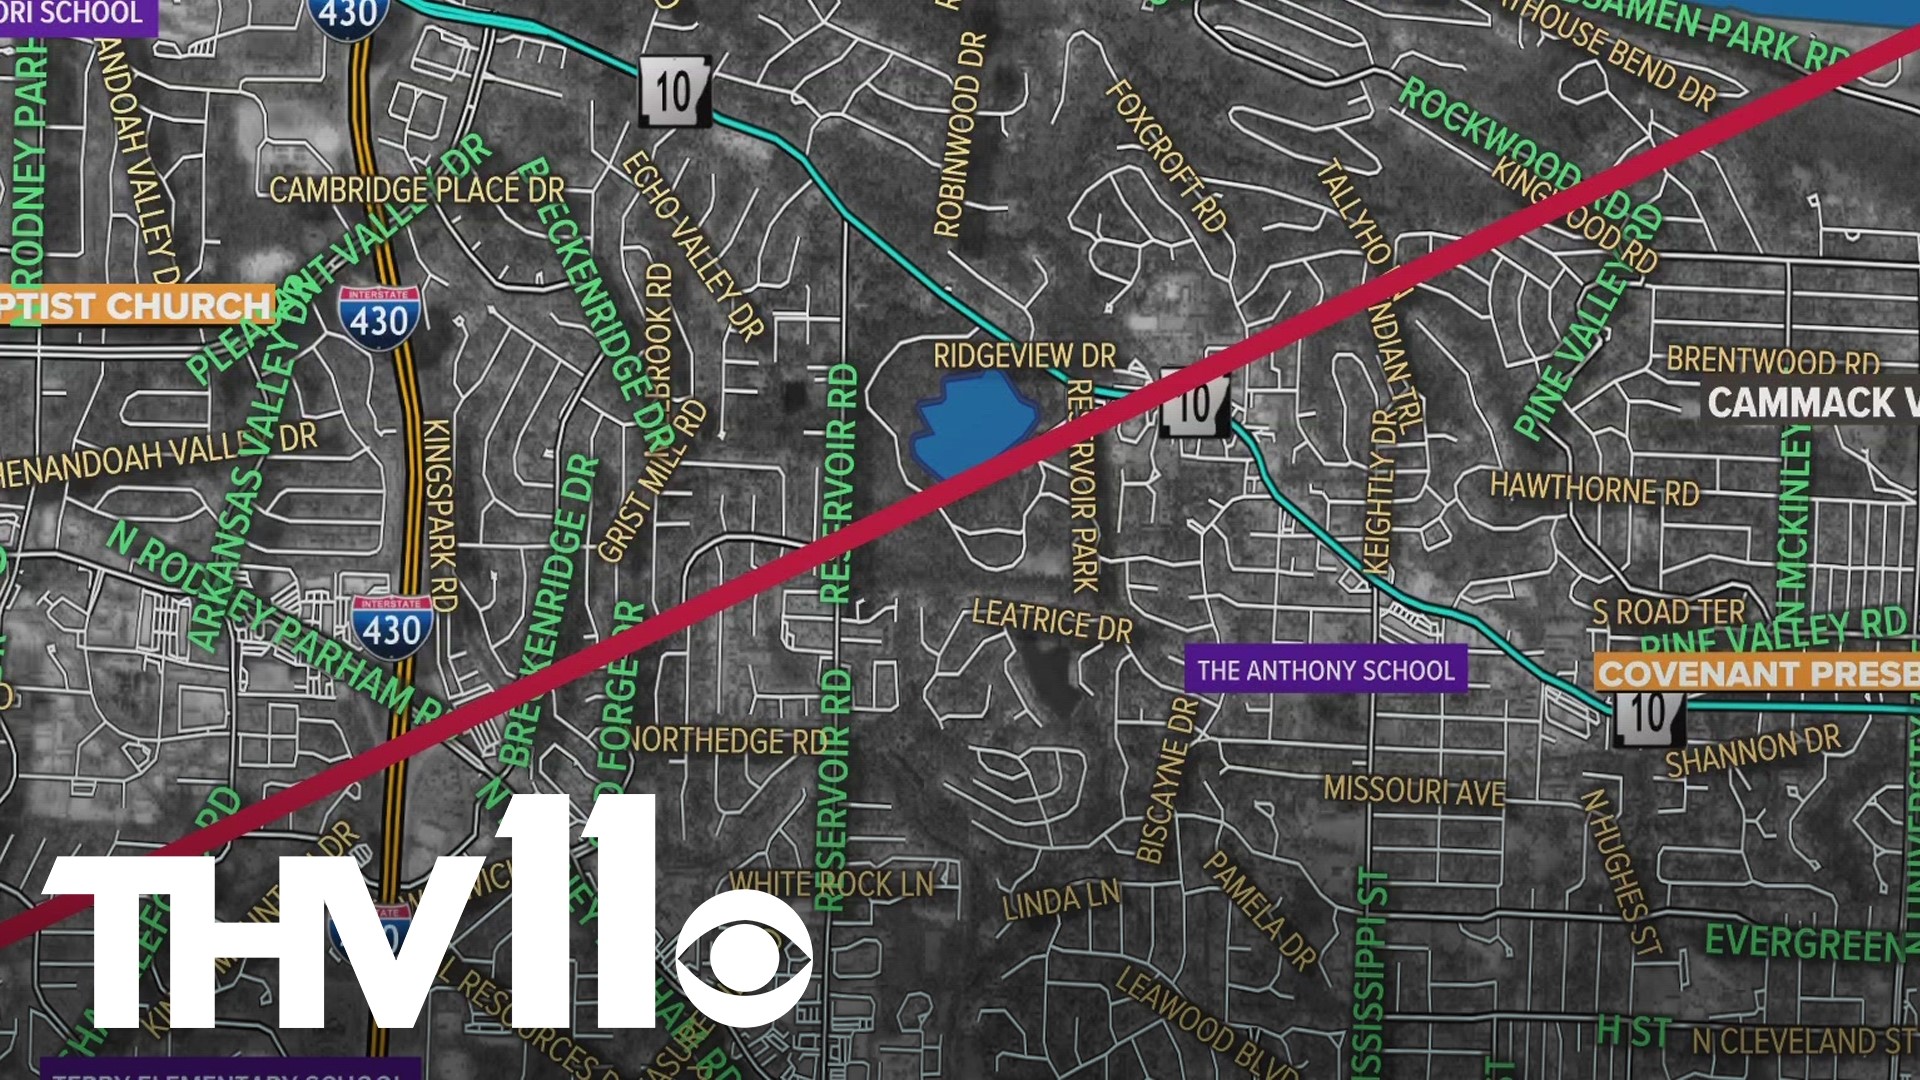 Here's the 40-mile path the tornado in West Little Rock took on Friday.